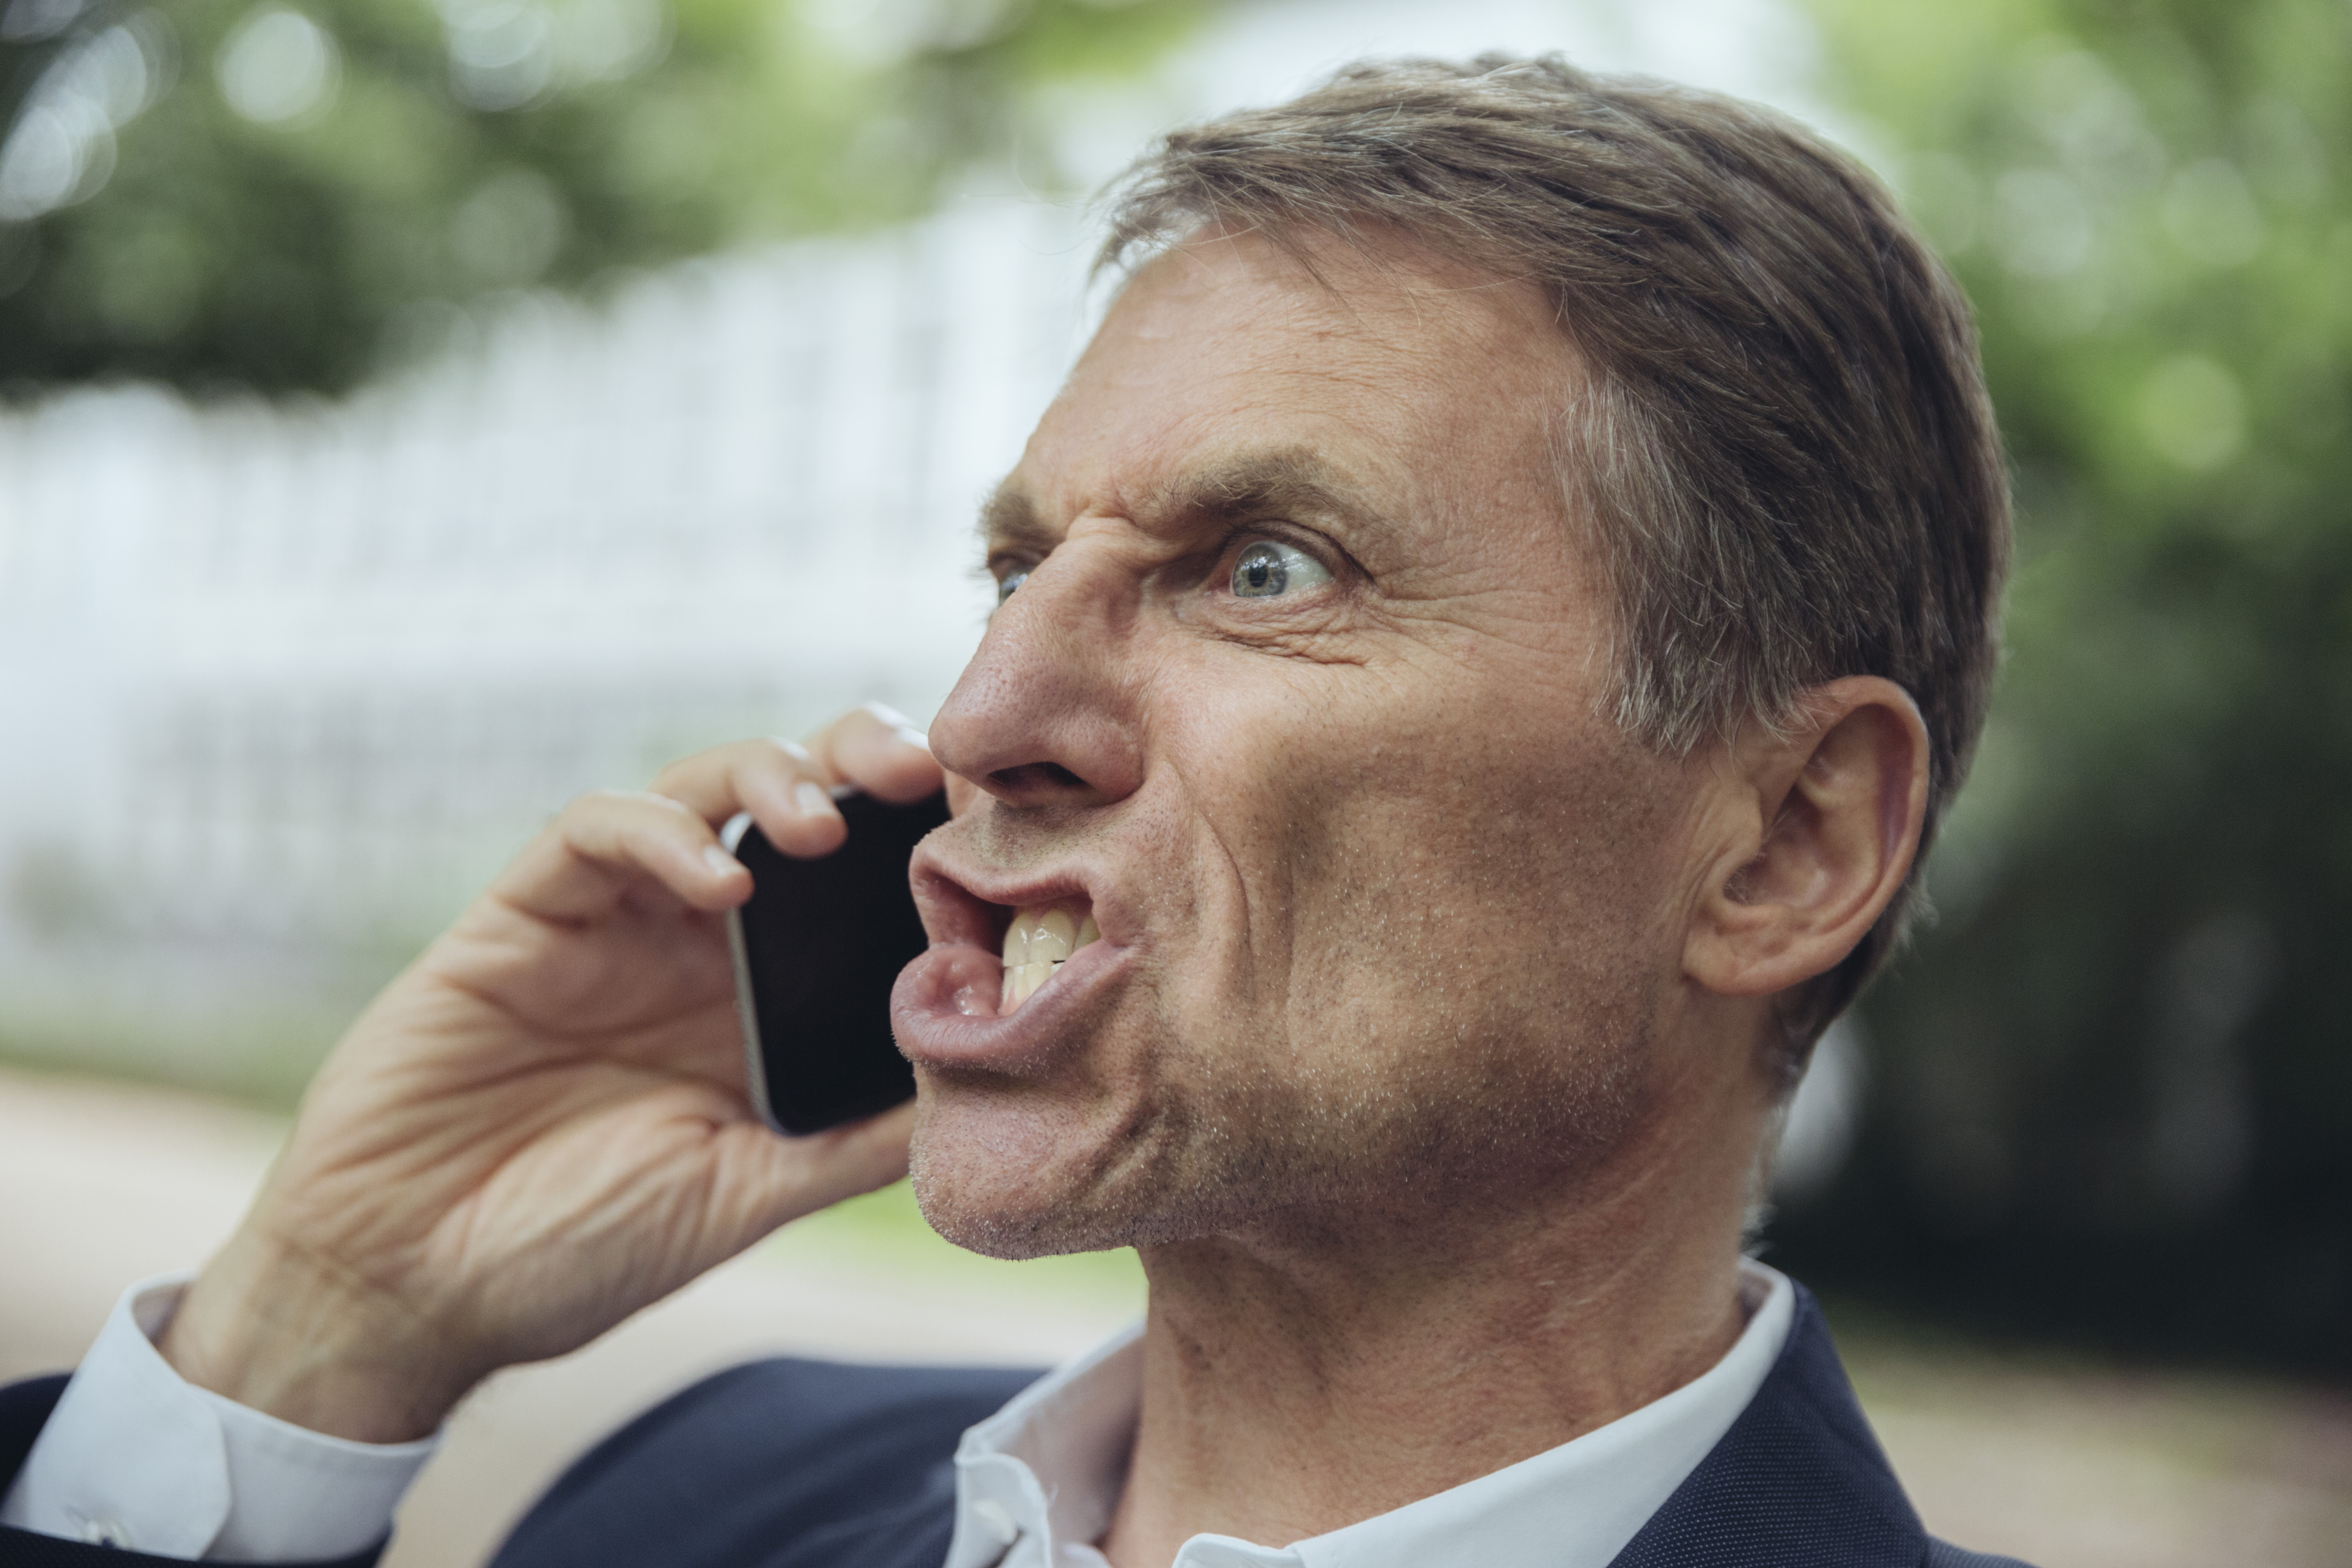 Angry mature man on the phone | Source: Getty Images